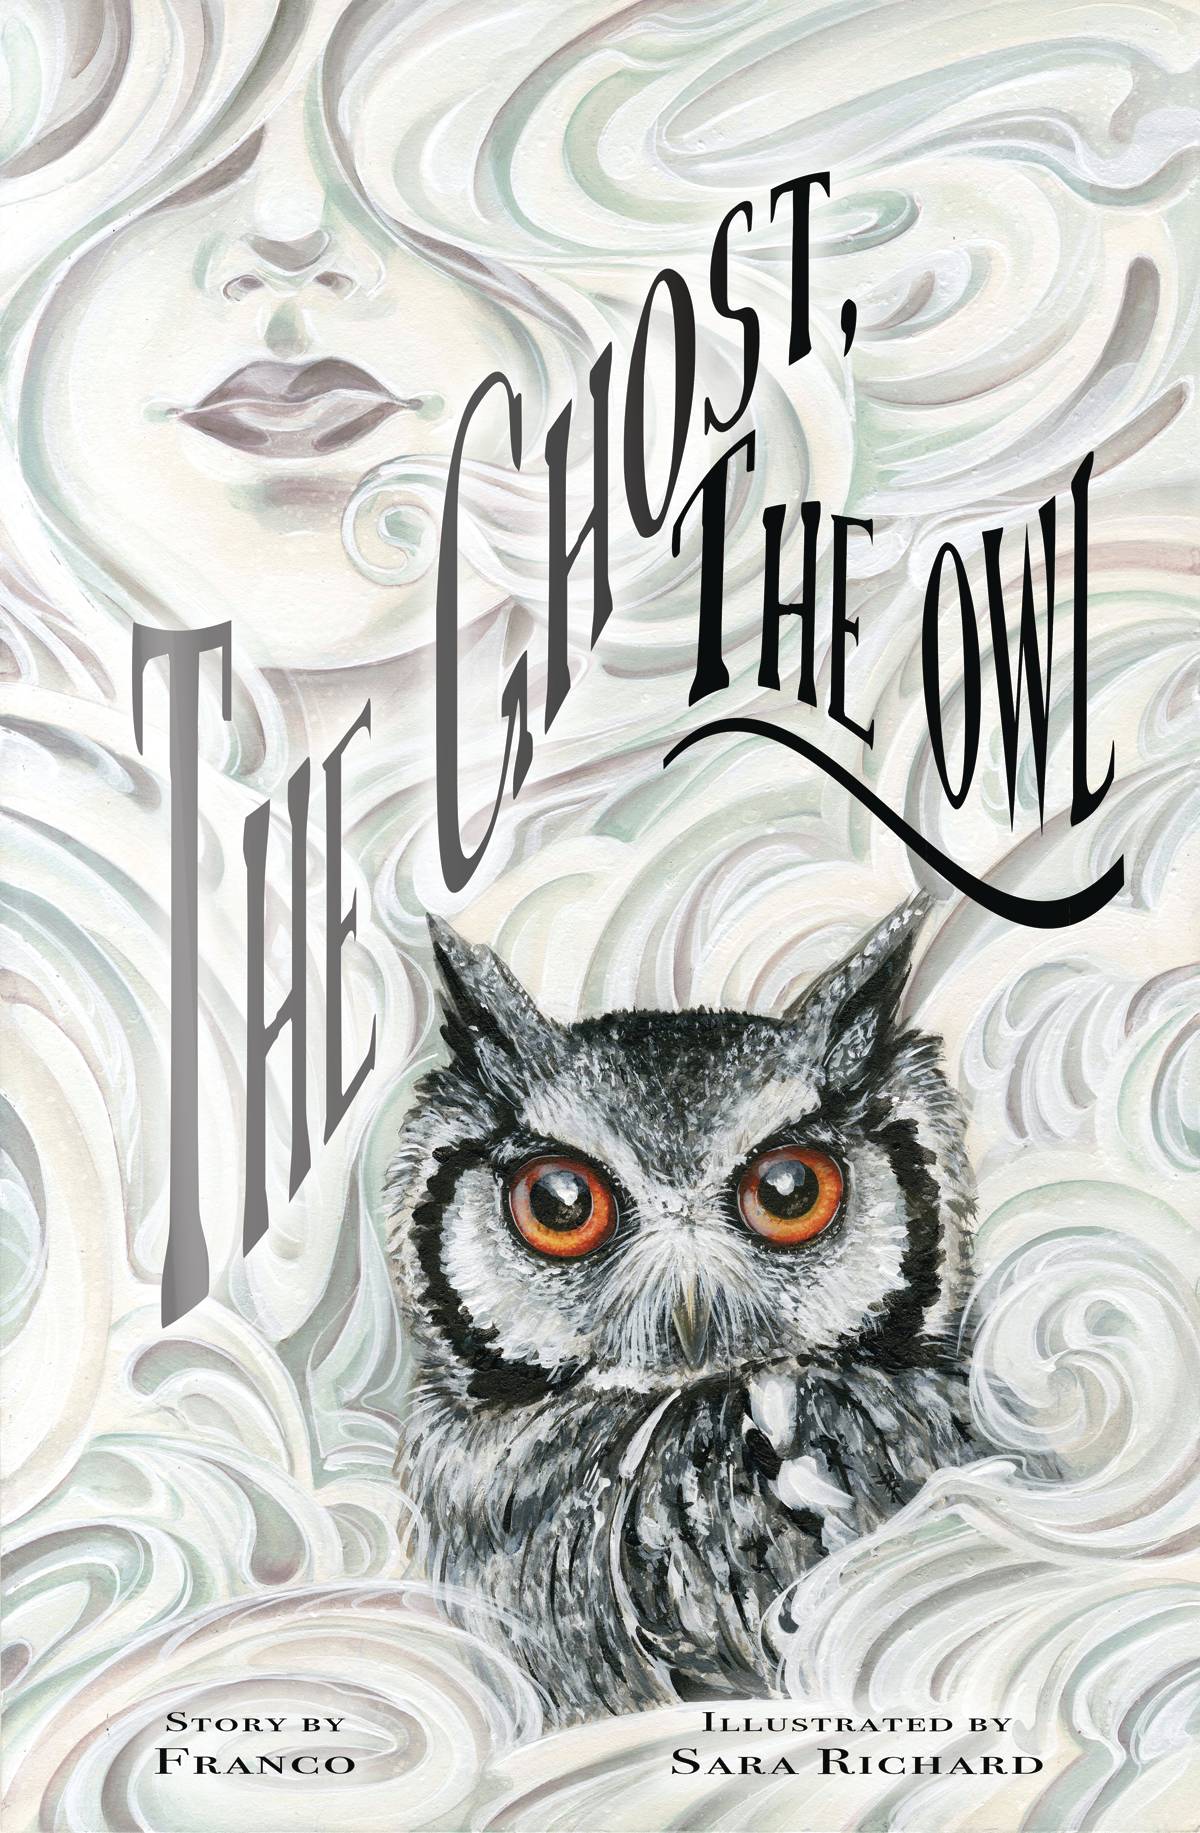 The Ghost & The Owl h/c